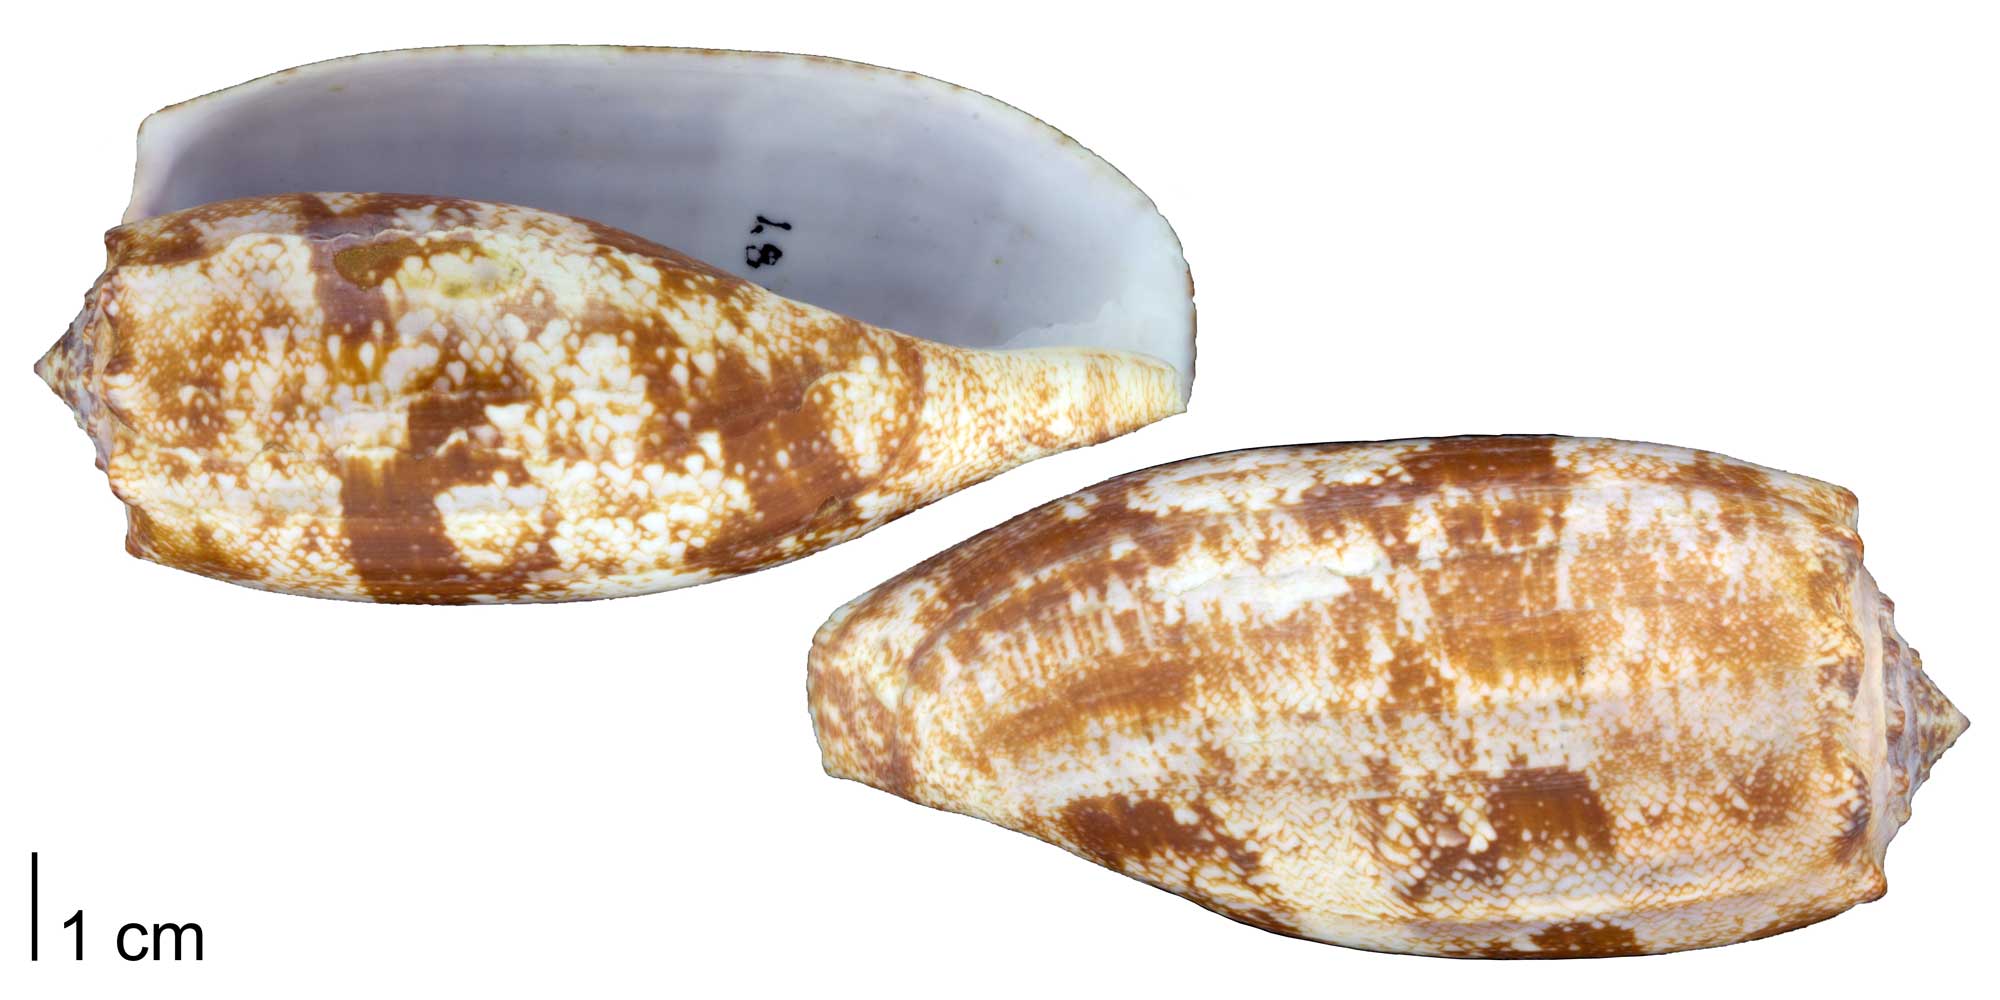 Photographs of the ventral and dorsal sides of a Conus geographus shell.